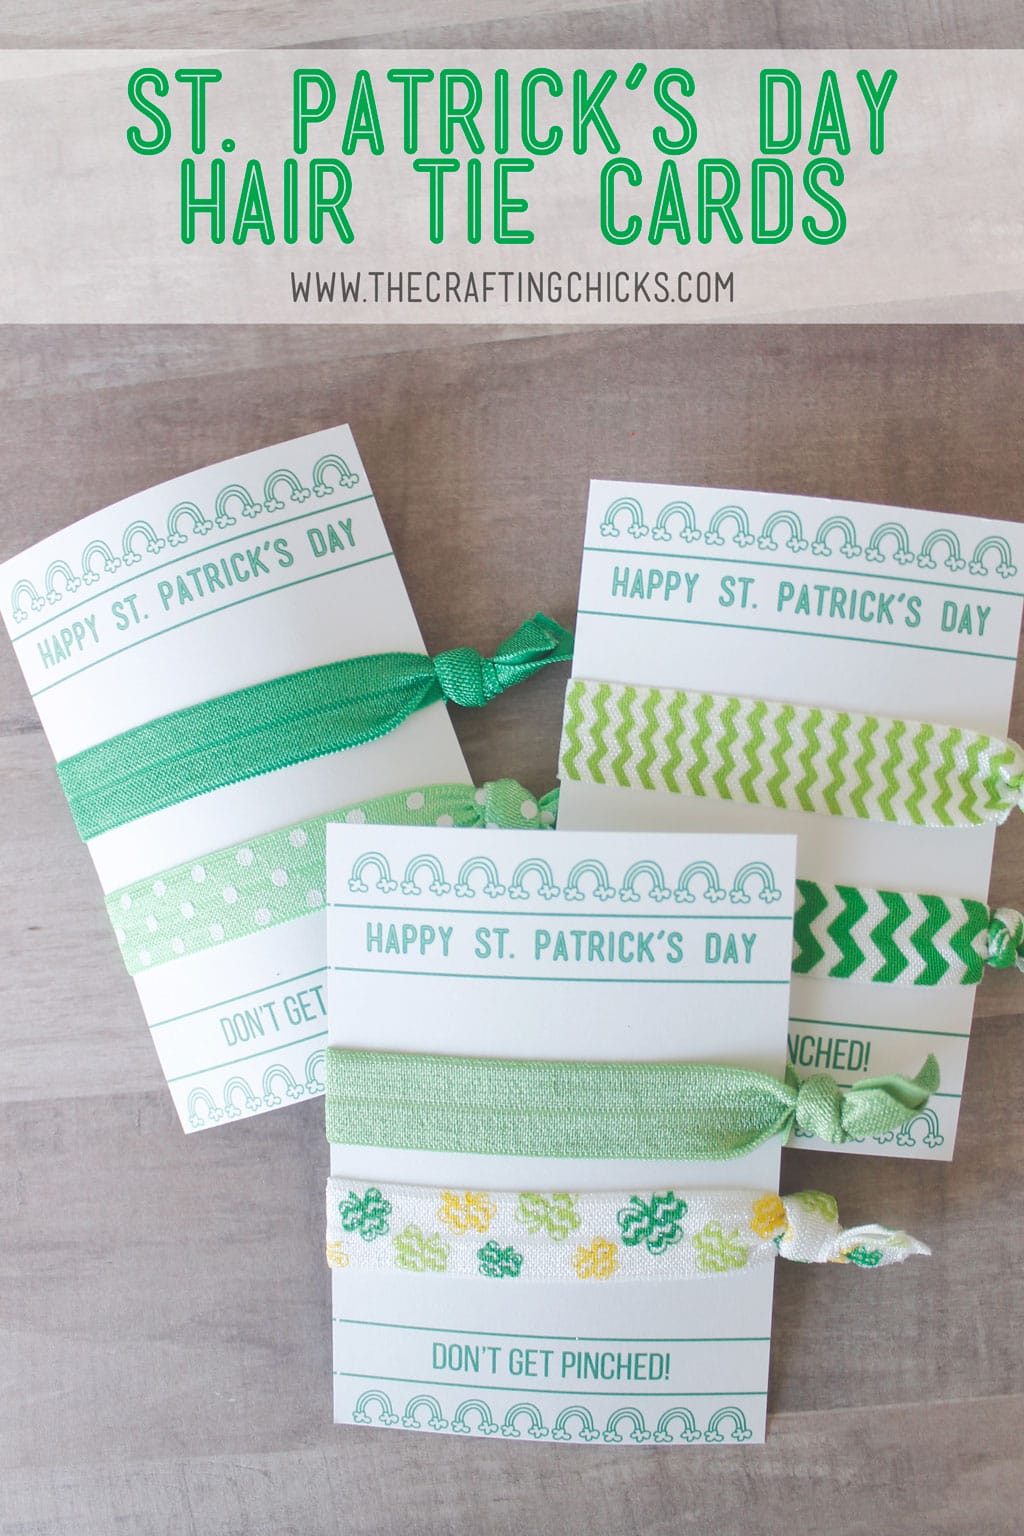 St. Patrick's Day Hair Tie Cards are a fun gift idea. Keep your friends from getting pinched by giving them these fun St. Patrick's Day themed hair ties.